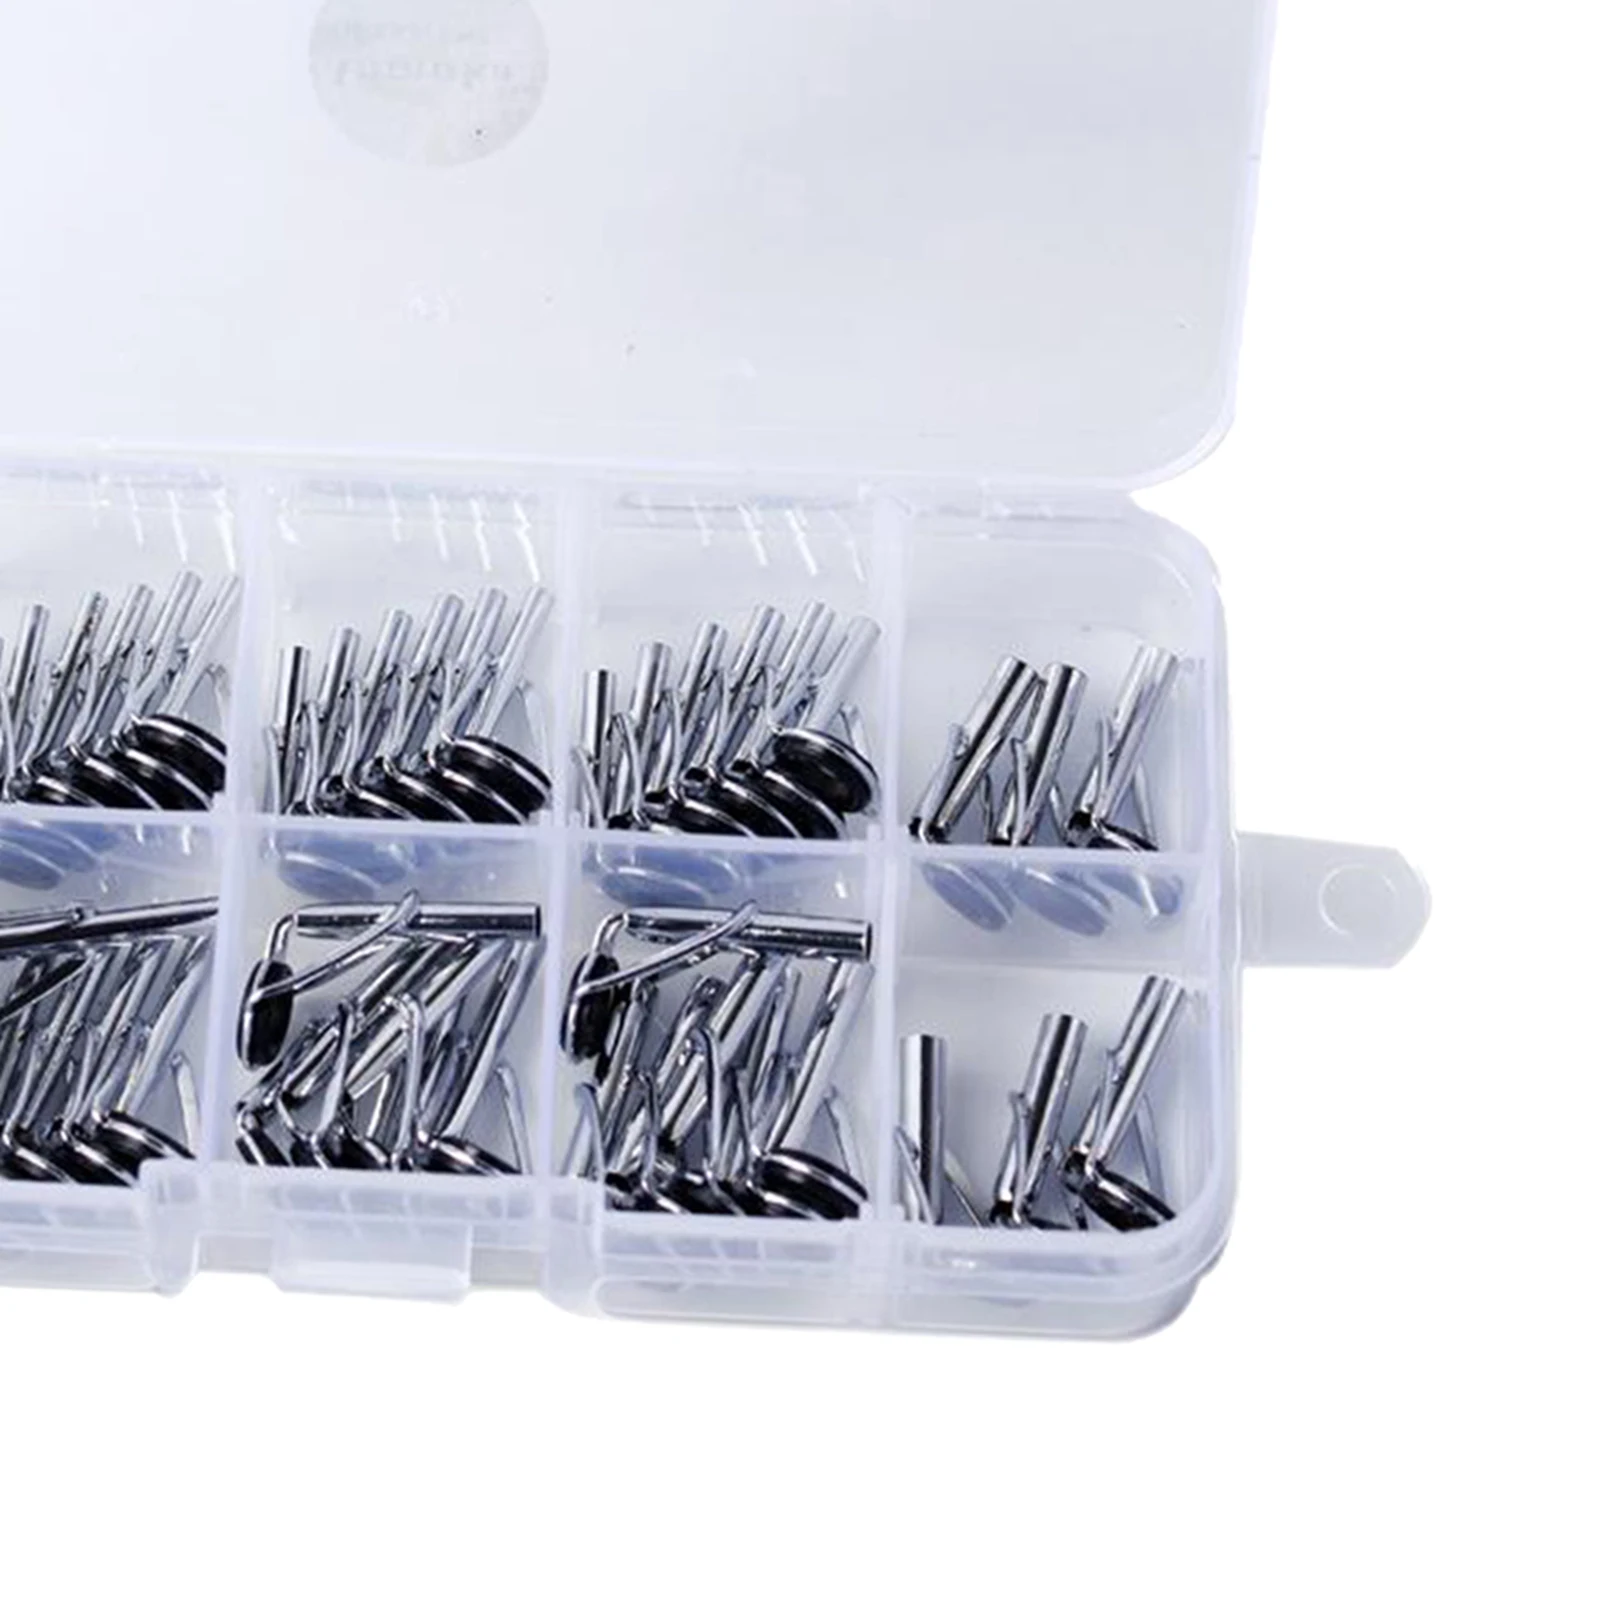 54Pcs Sea Fishing Rod Pole Guide Tip Top Ring Eye Repair Kit Stainless Steel Sea Boat Spinning Casting Fishing Rod Guides Tool